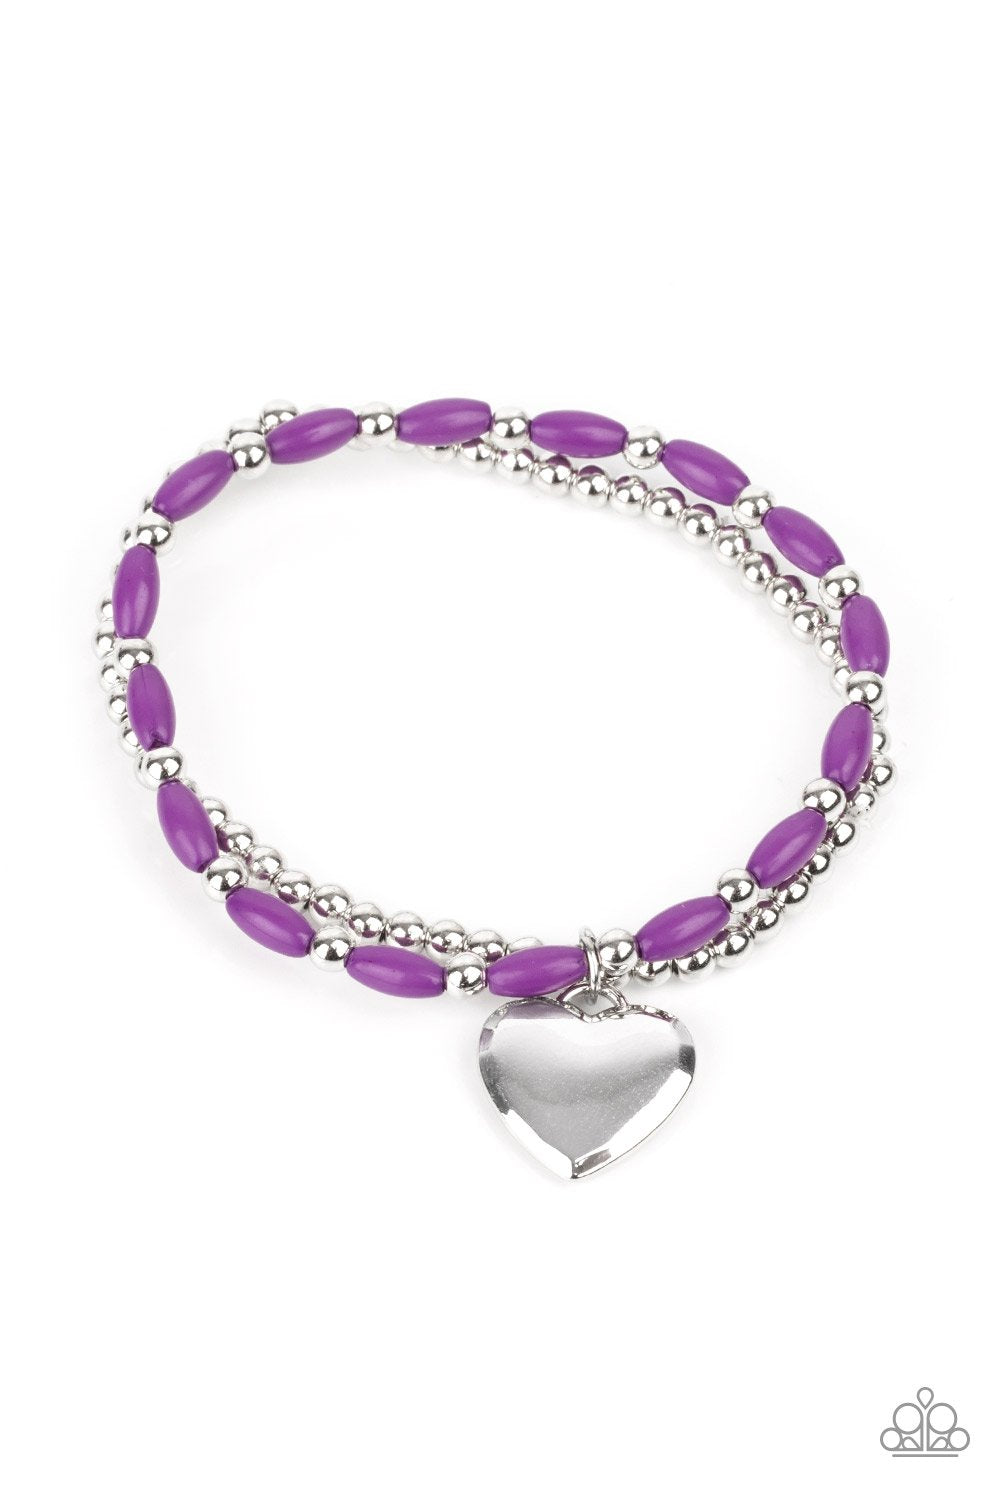 &lt;p&gt;A shiny silver heart dangles from a strand of playful purple beads. It is paired with a strand of round silver beads threaded along a stretchy band for a whimsical charm around the wrist.&lt;/p&gt;
&lt;p&gt;&lt;i&gt; Sold as one pair of bracelets.&lt;/i&gt;&lt;/p&gt;